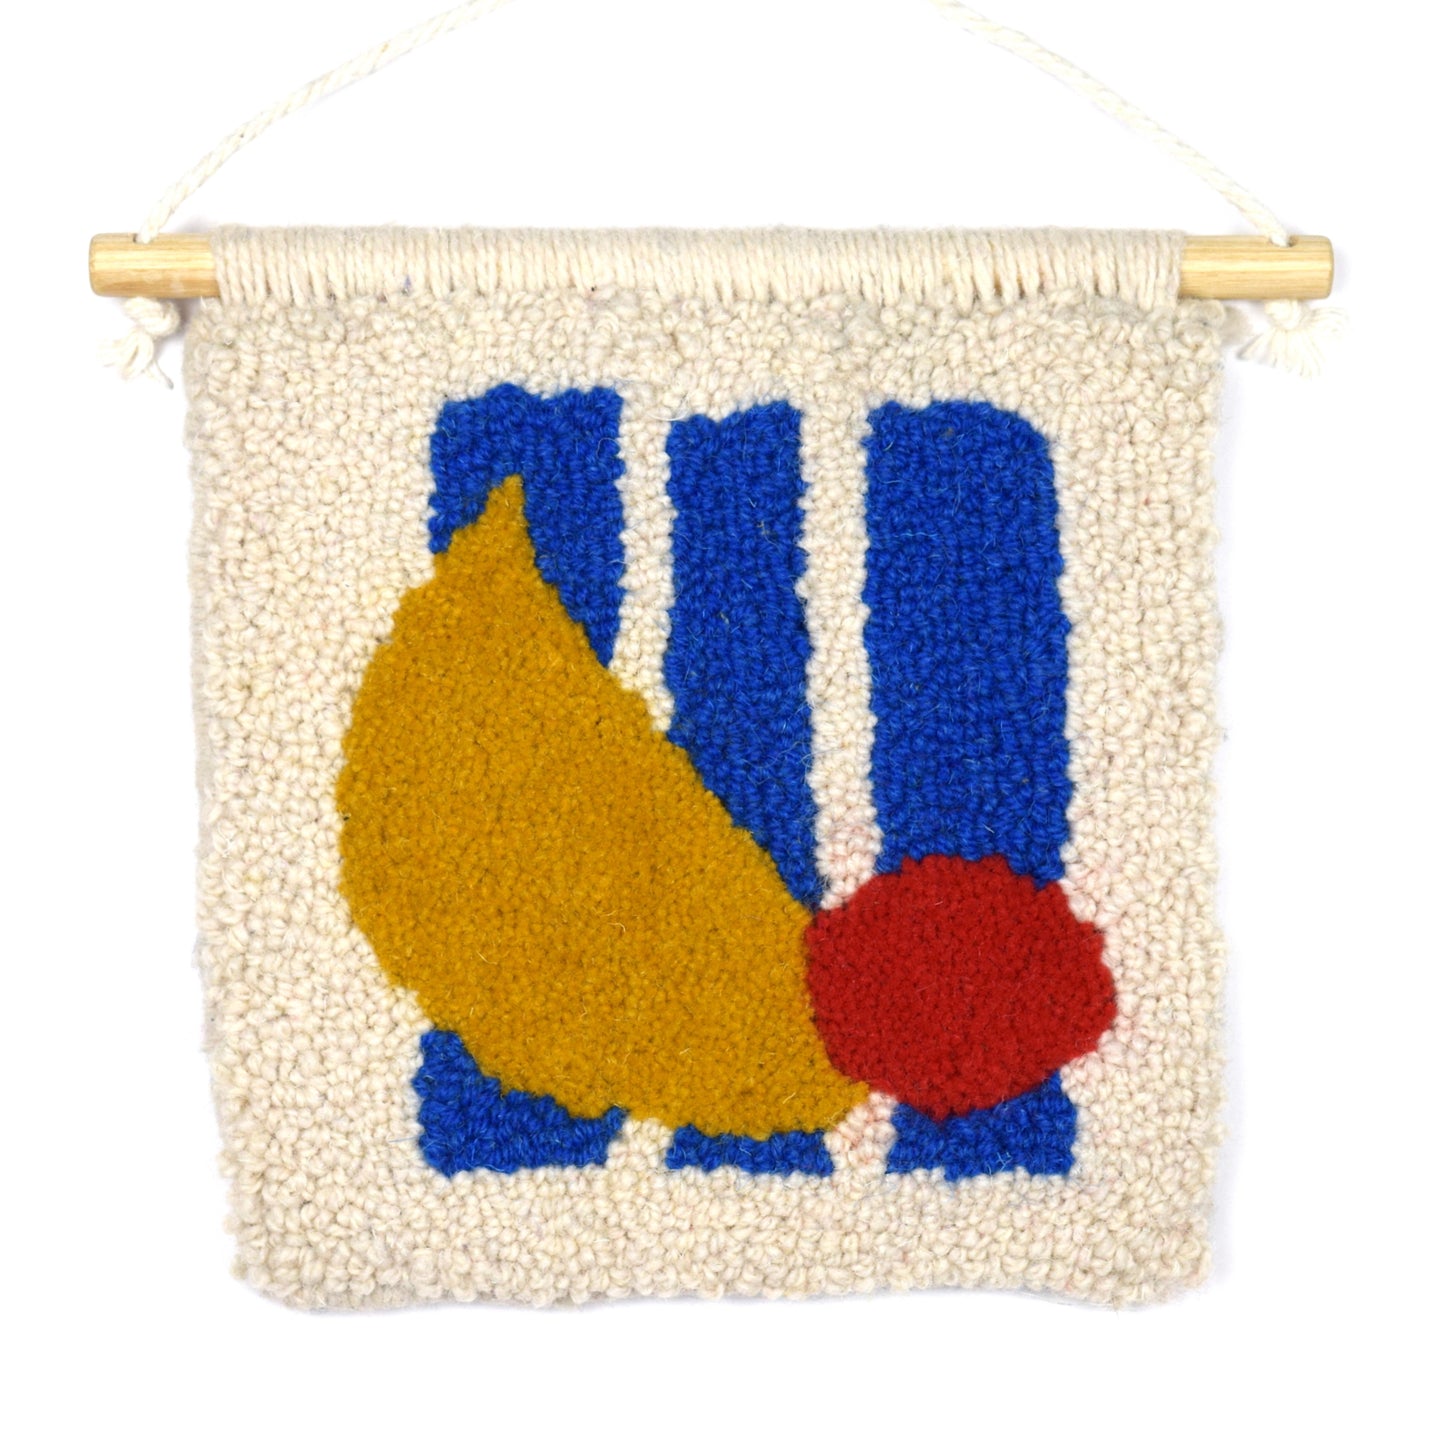 A Hand Tufted Wall Hanging in a loop and cut pile, using reclaimed yarn in mustard, red, blue and cream. Contemporary use of semi-circle, circle and stripes. 